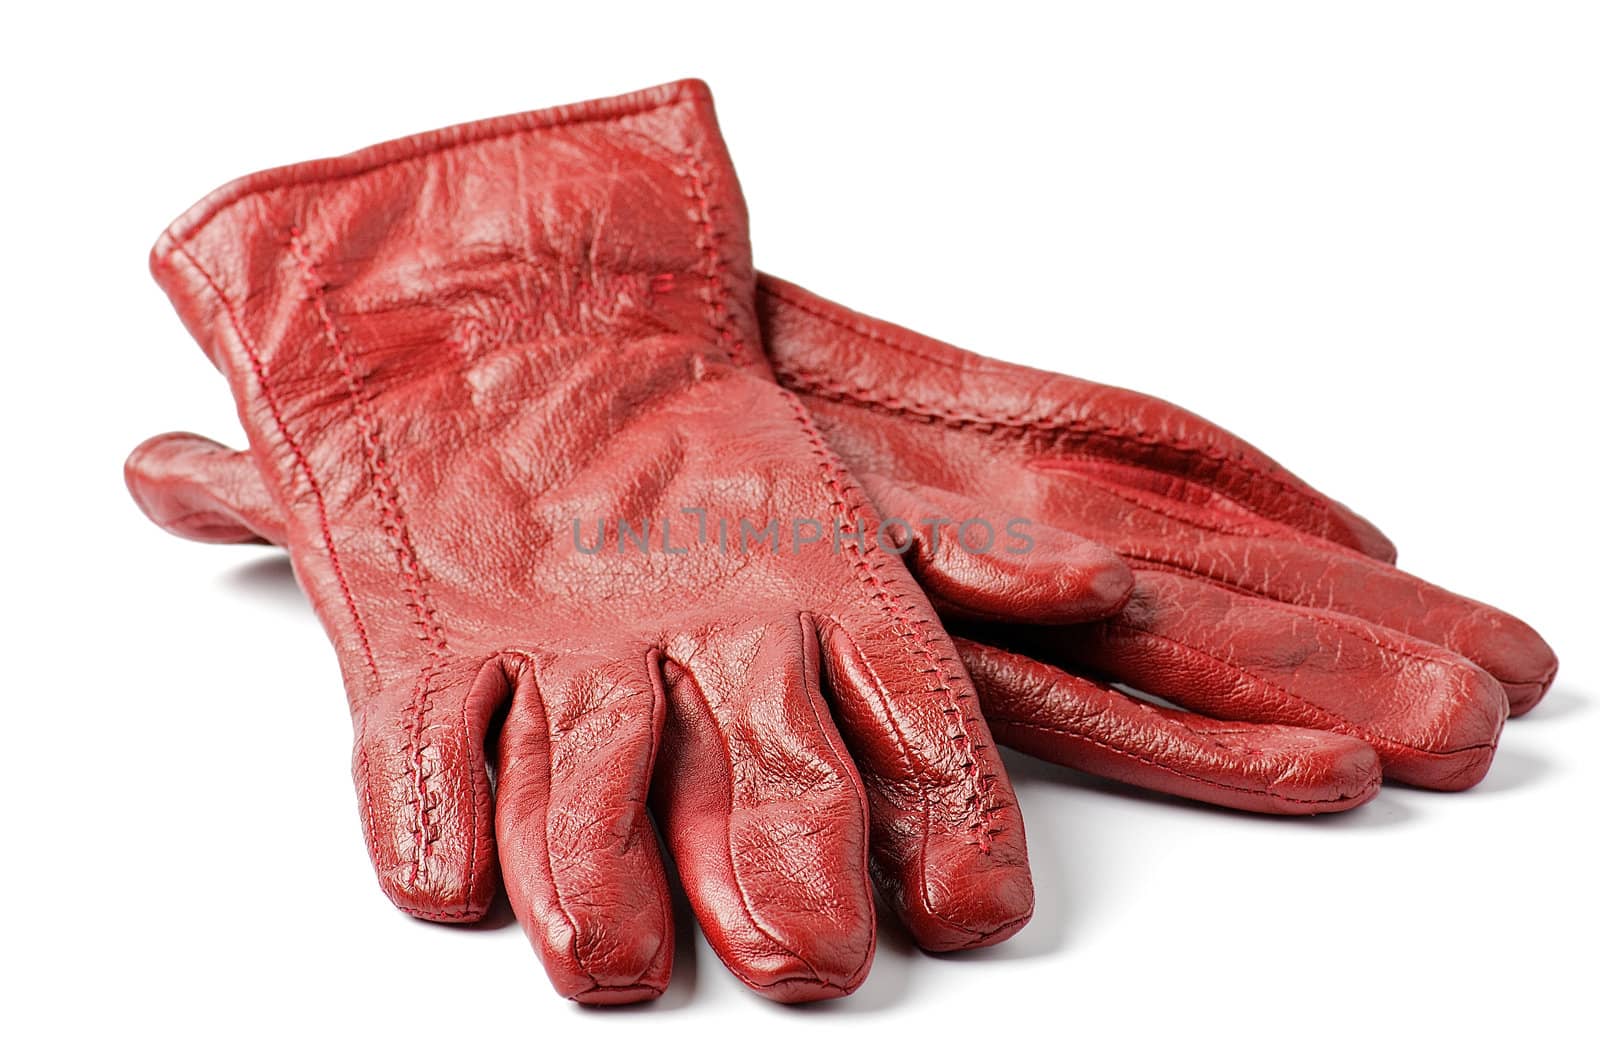 Women's Red leather gloves isolated on white background